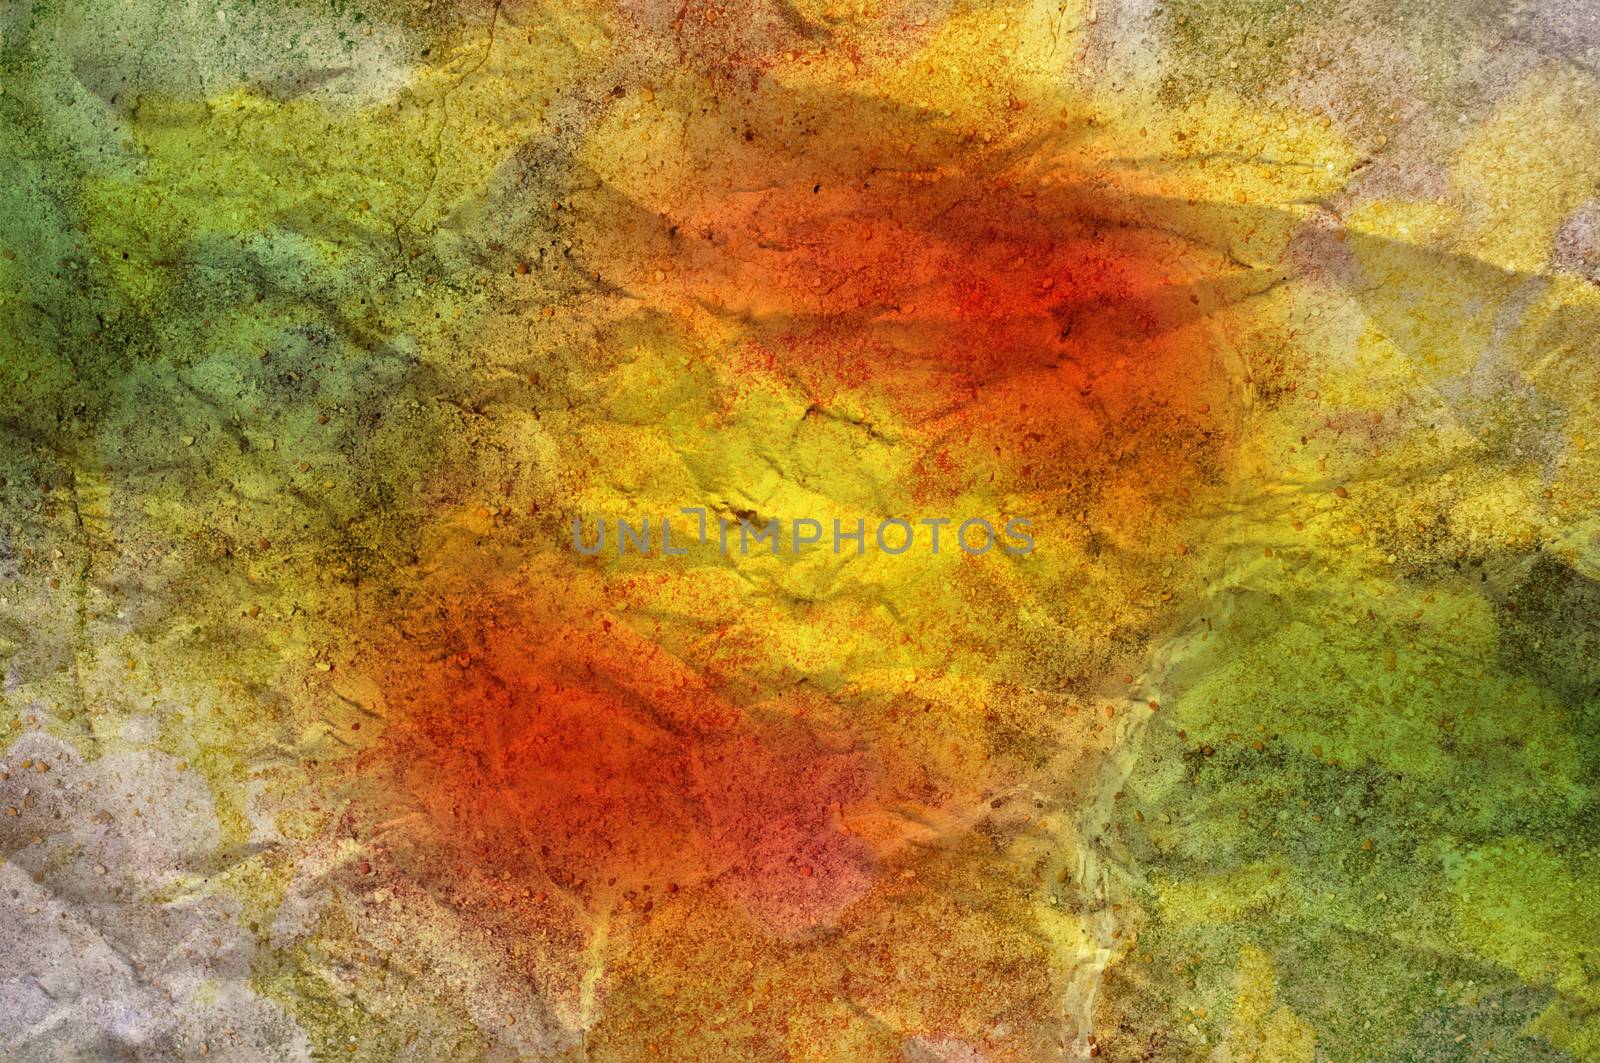 A crinkled stone texture overlaid with softly blended red, yellow and green hues to make a colourful abstract background.